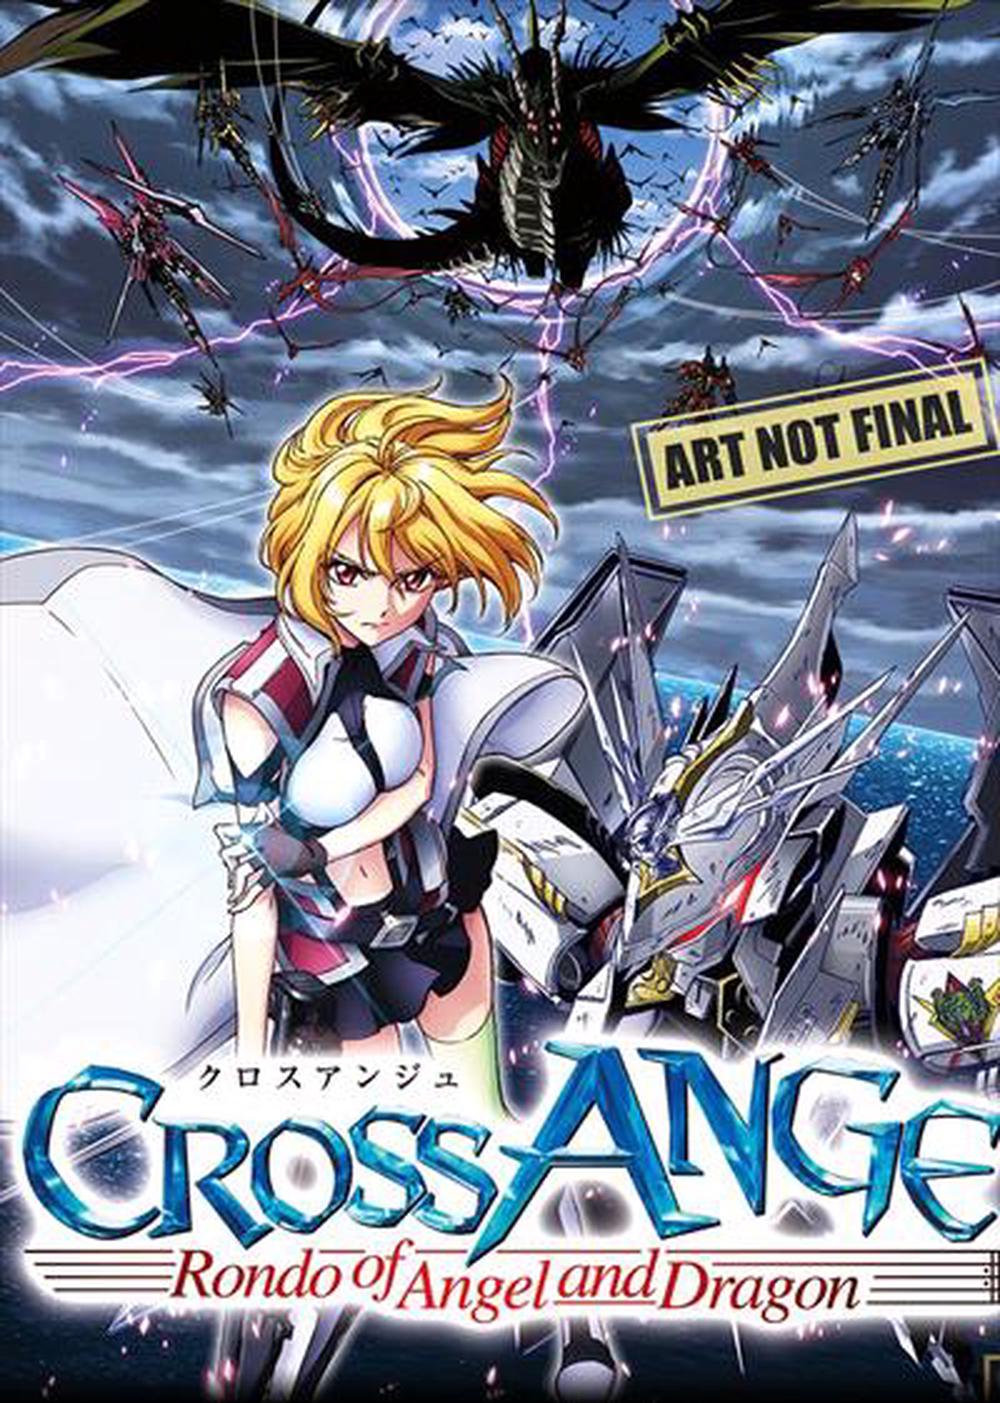 Cross Ange Rondo Of Angel And Dragon Part 1 Eps 1 12 Blu Images, Photos, Reviews